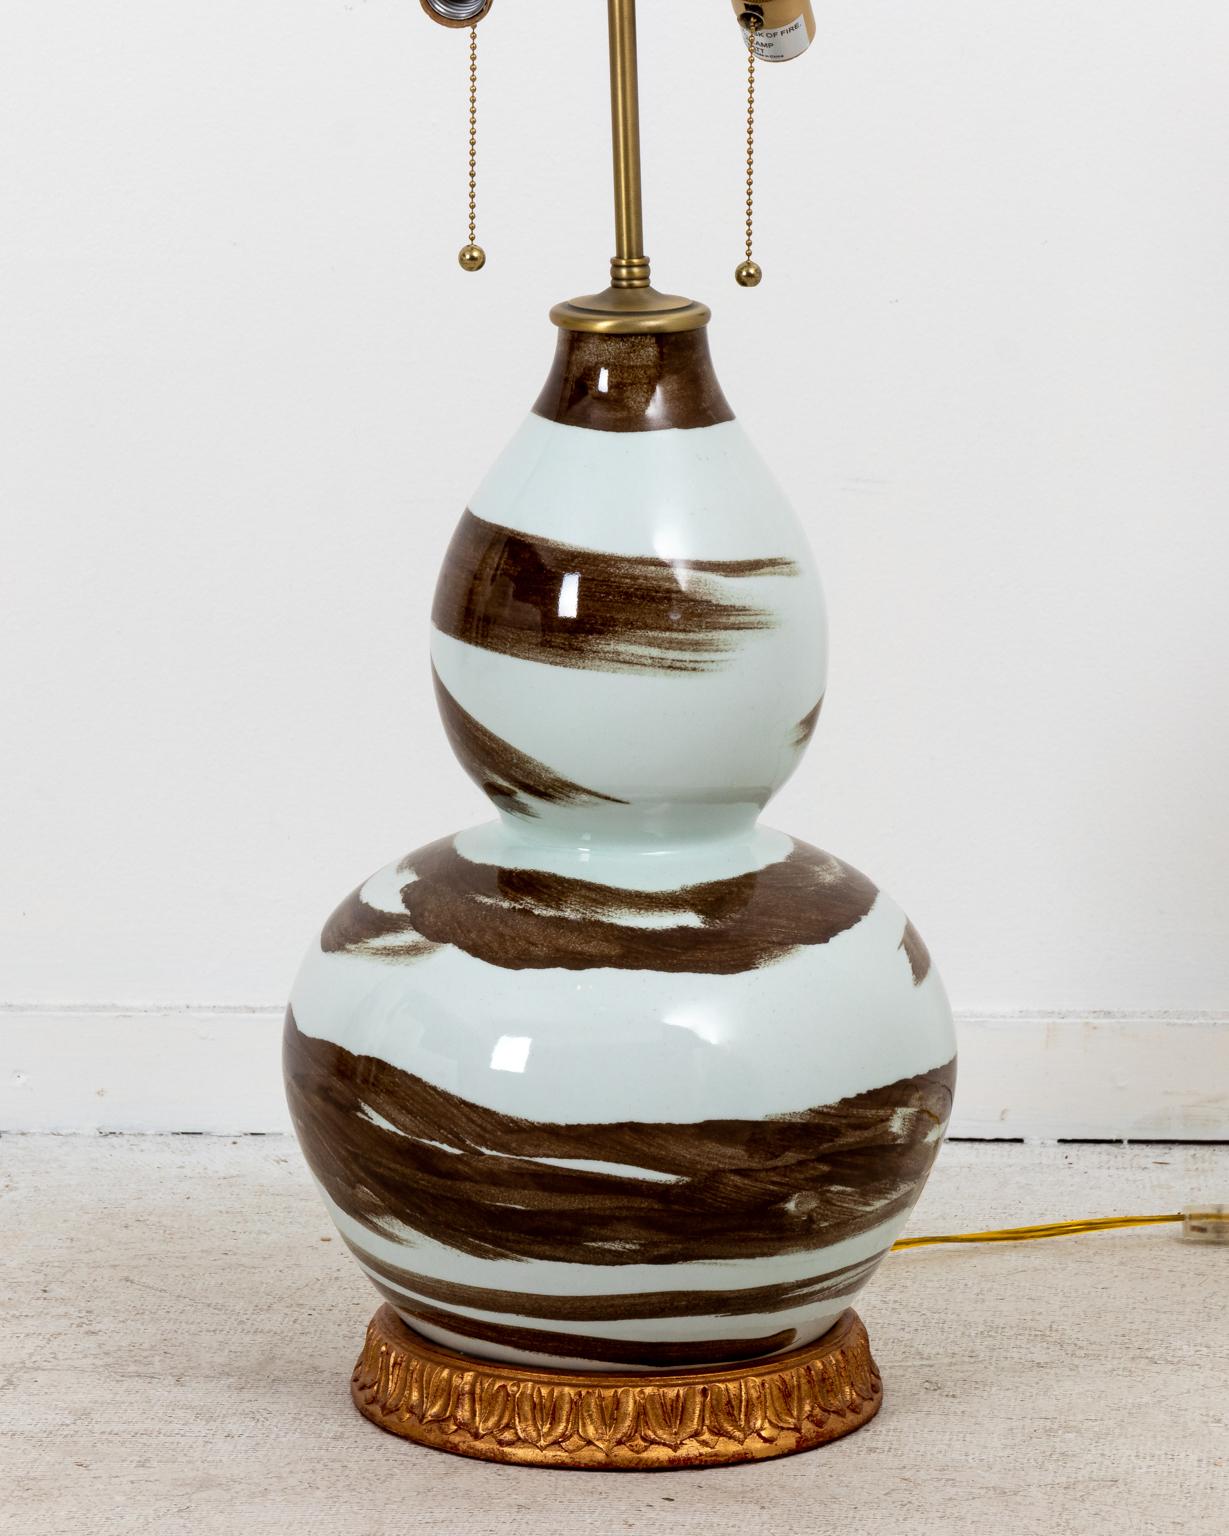 Contemporary pair of brown and white ceramic gourd shaped table lamps by Bunny Williams. The lamps feature brushstroke details on the body, gold giltwood carved bases, and double socket switch. Made in the United States. Shades not included. Please